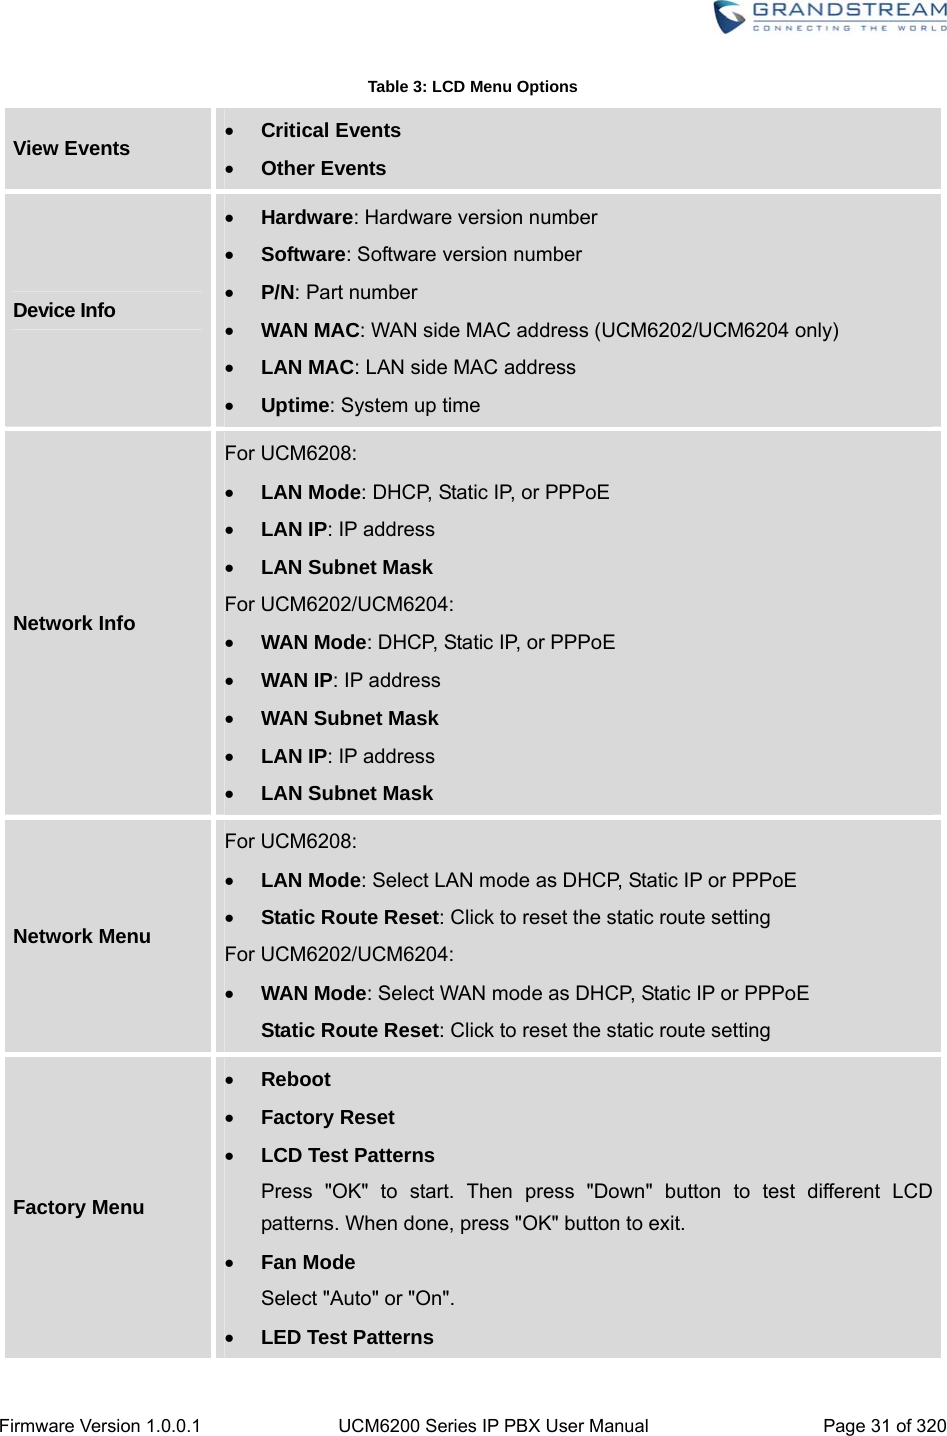  Firmware Version 1.0.0.1  UCM6200 Series IP PBX User Manual  Page 31 of 320 Table 3: LCD Menu Options View Events   Critical Events  Other Events Device Info  Hardware: Hardware version number  Software: Software version number  P/N: Part number  WAN MAC: WAN side MAC address (UCM6202/UCM6204 only)  LAN MAC: LAN side MAC address  Uptime: System up time Network Info For UCM6208:  LAN Mode: DHCP, Static IP, or PPPoE  LAN IP: IP address  LAN Subnet Mask For UCM6202/UCM6204:  WAN Mode: DHCP, Static IP, or PPPoE  WAN IP: IP address  WAN Subnet Mask  LAN IP: IP address  LAN Subnet Mask Network Menu For UCM6208:  LAN Mode: Select LAN mode as DHCP, Static IP or PPPoE  Static Route Reset: Click to reset the static route setting For UCM6202/UCM6204:  WAN Mode: Select WAN mode as DHCP, Static IP or PPPoE Static Route Reset: Click to reset the static route setting Factory Menu  Reboot  Factory Reset  LCD Test Patterns Press &quot;OK&quot; to start. Then press &quot;Down&quot; button to test different LCD patterns. When done, press &quot;OK&quot; button to exit.  Fan Mode Select &quot;Auto&quot; or &quot;On&quot;.  LED Test Patterns 